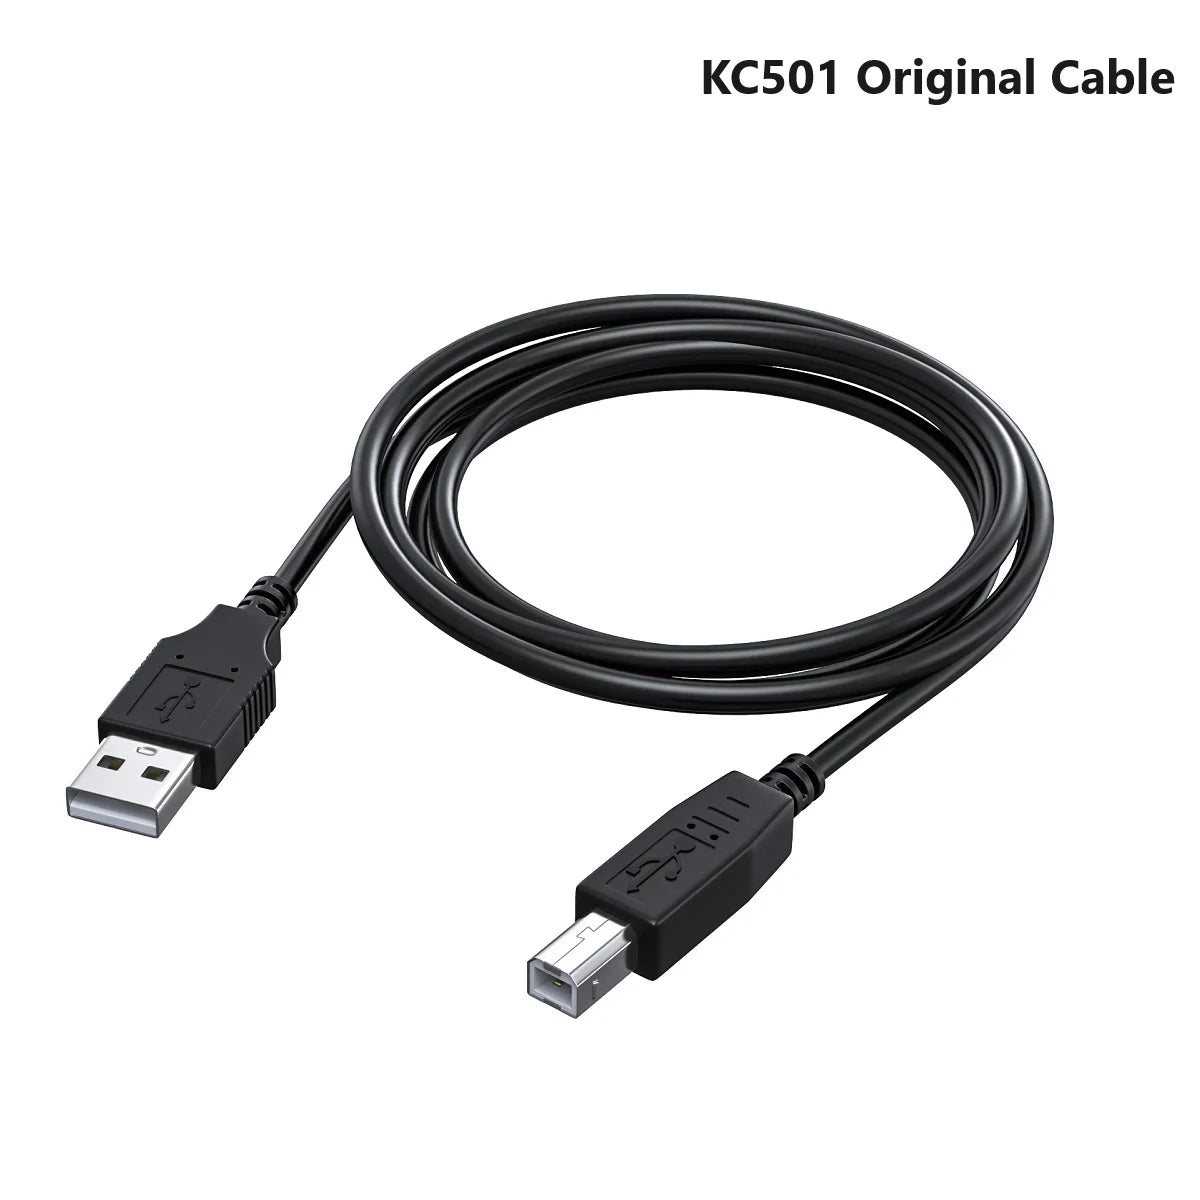 XTOOL 100% Original KC100 Cables For XTOOL X100 PAD3 For VW4&5th IMMO XTOOL KC501 Cable For X100MAX Key Programming - Dynamex